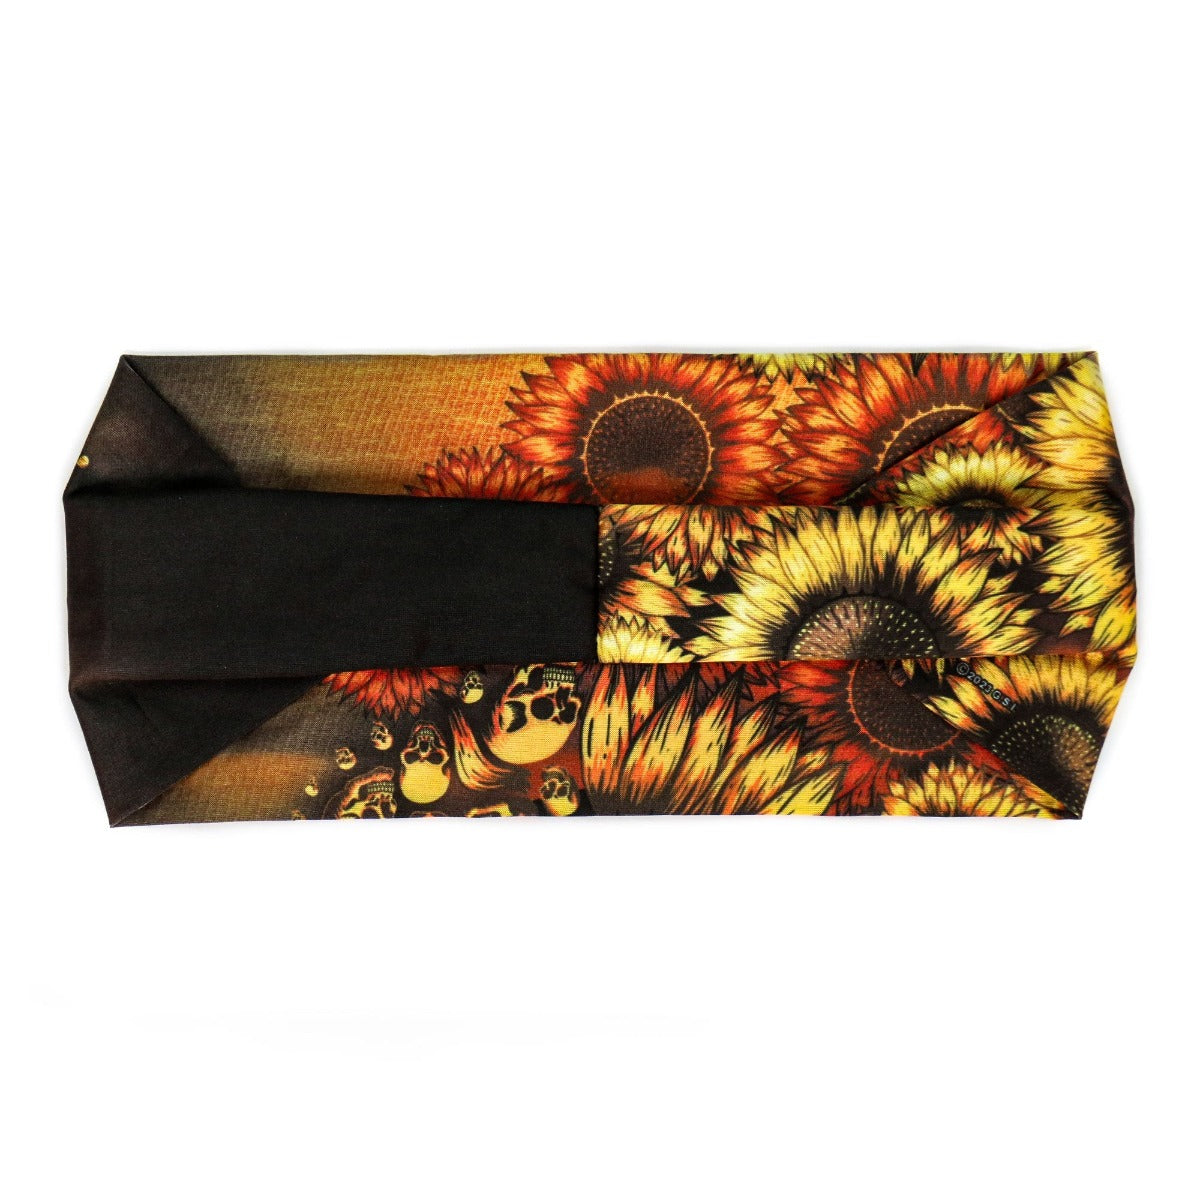 A Hot Leathers Sunflower Skulls Bandana Headband Wraps w/Rhinestones, perfect for adding a touch of sparkle and biker style to your look.